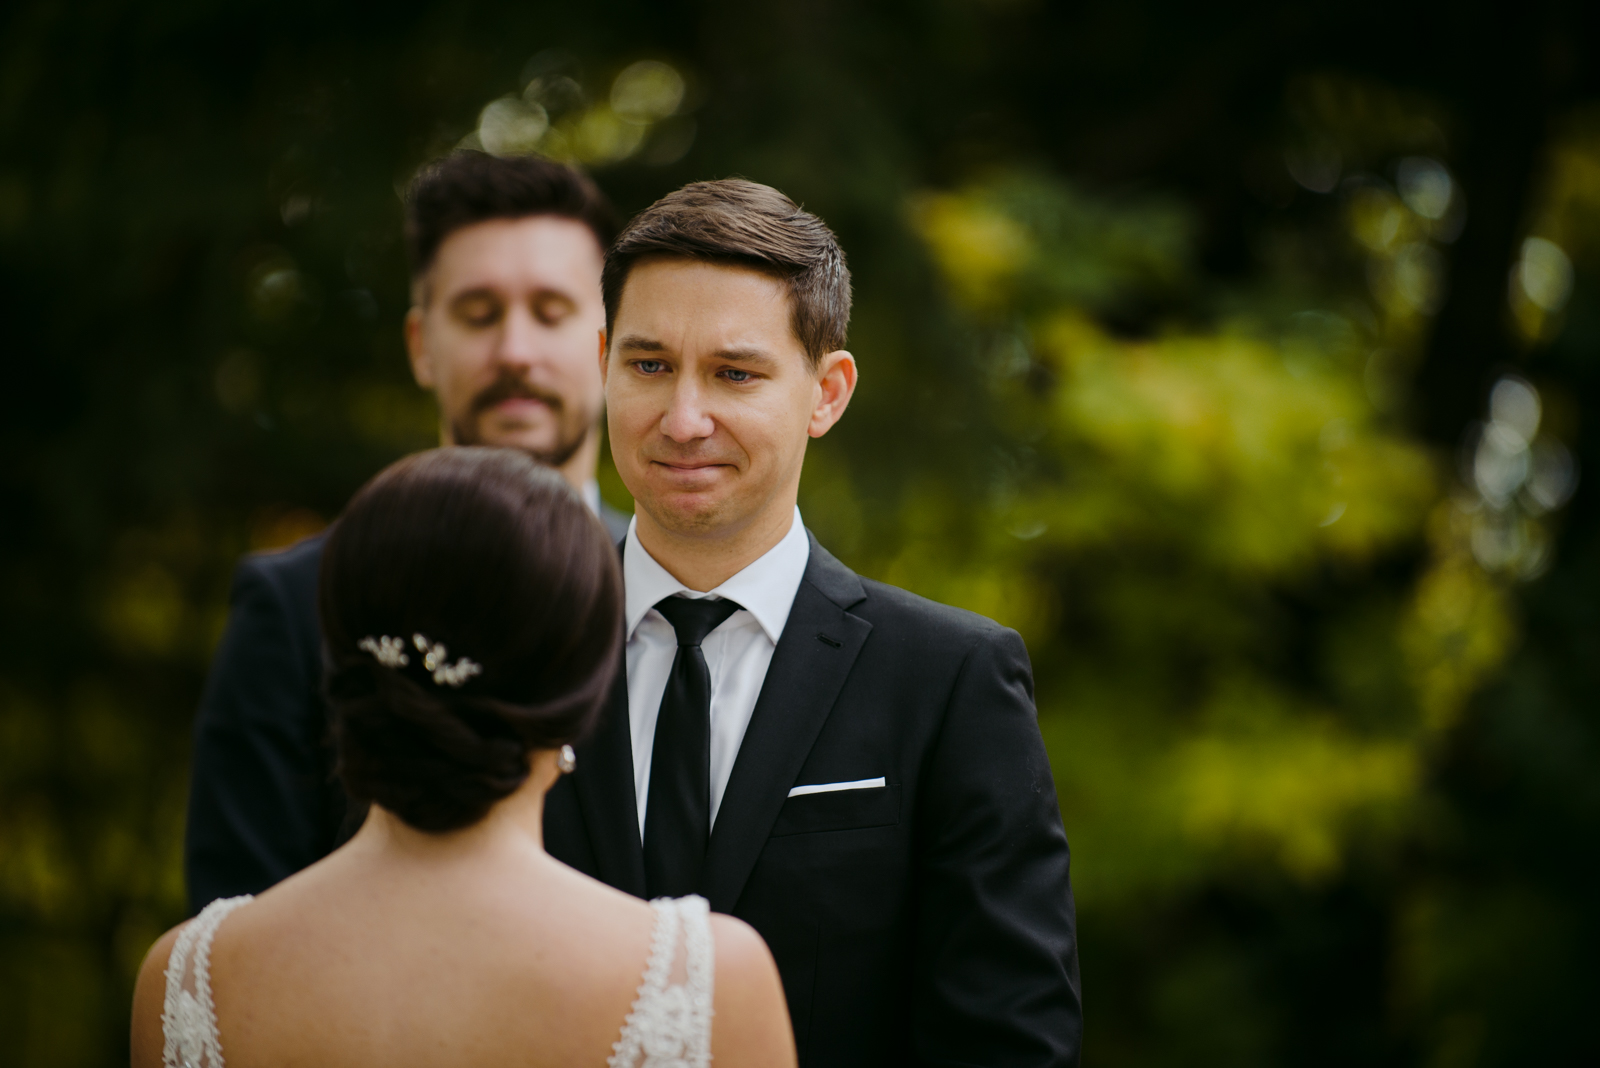 groom tearing up during outdoor wedding ceremony